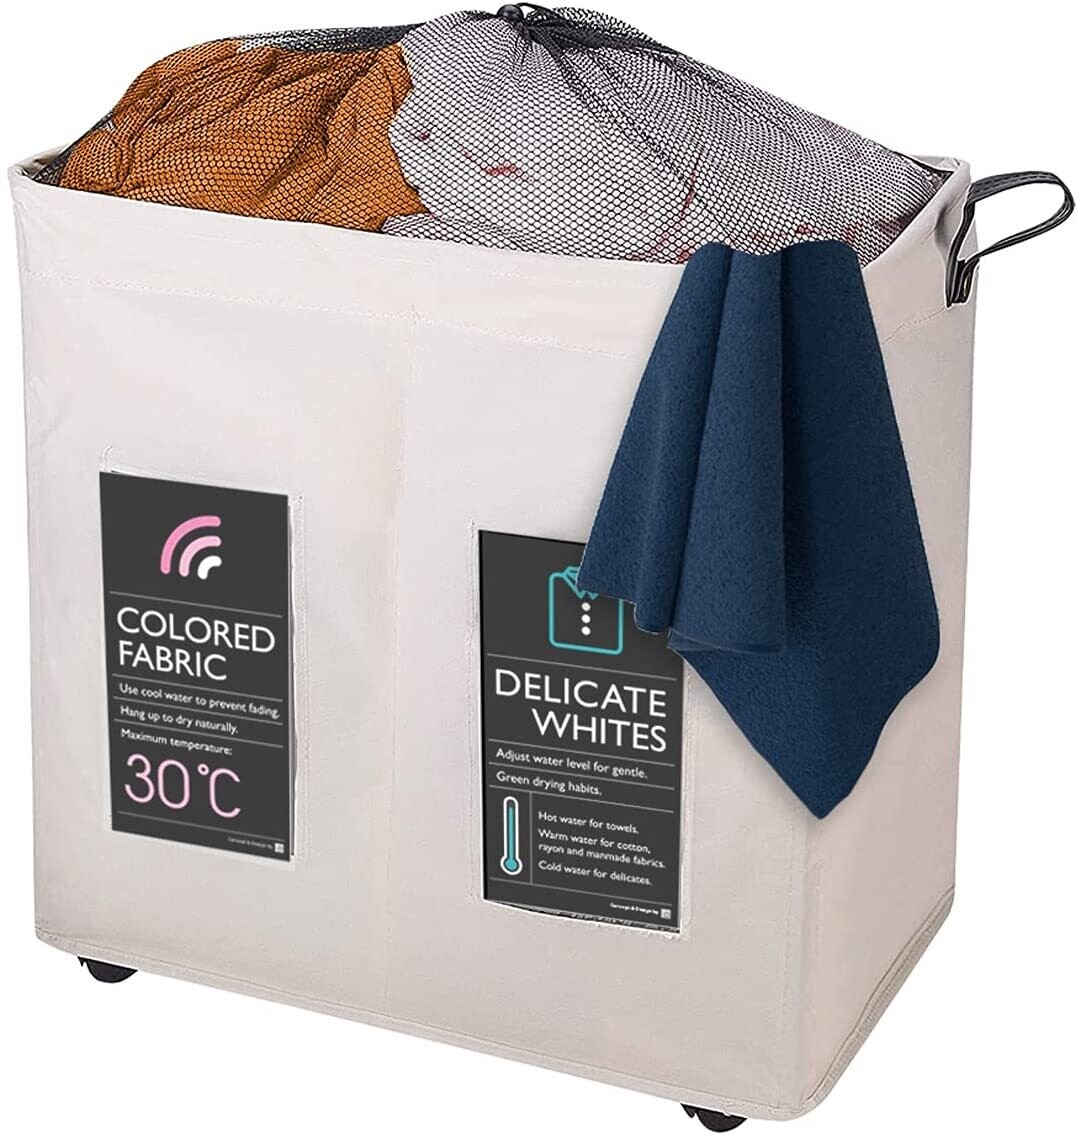 KNIGHT Light Weight Laundry Basket 120L Collapsible Laundry Bag with Wheels  Mesh Cover & Handles 2 Separate Sections | Folding Portable Washing |  Storage Bin Durable Fabric | Washing (Ivory)